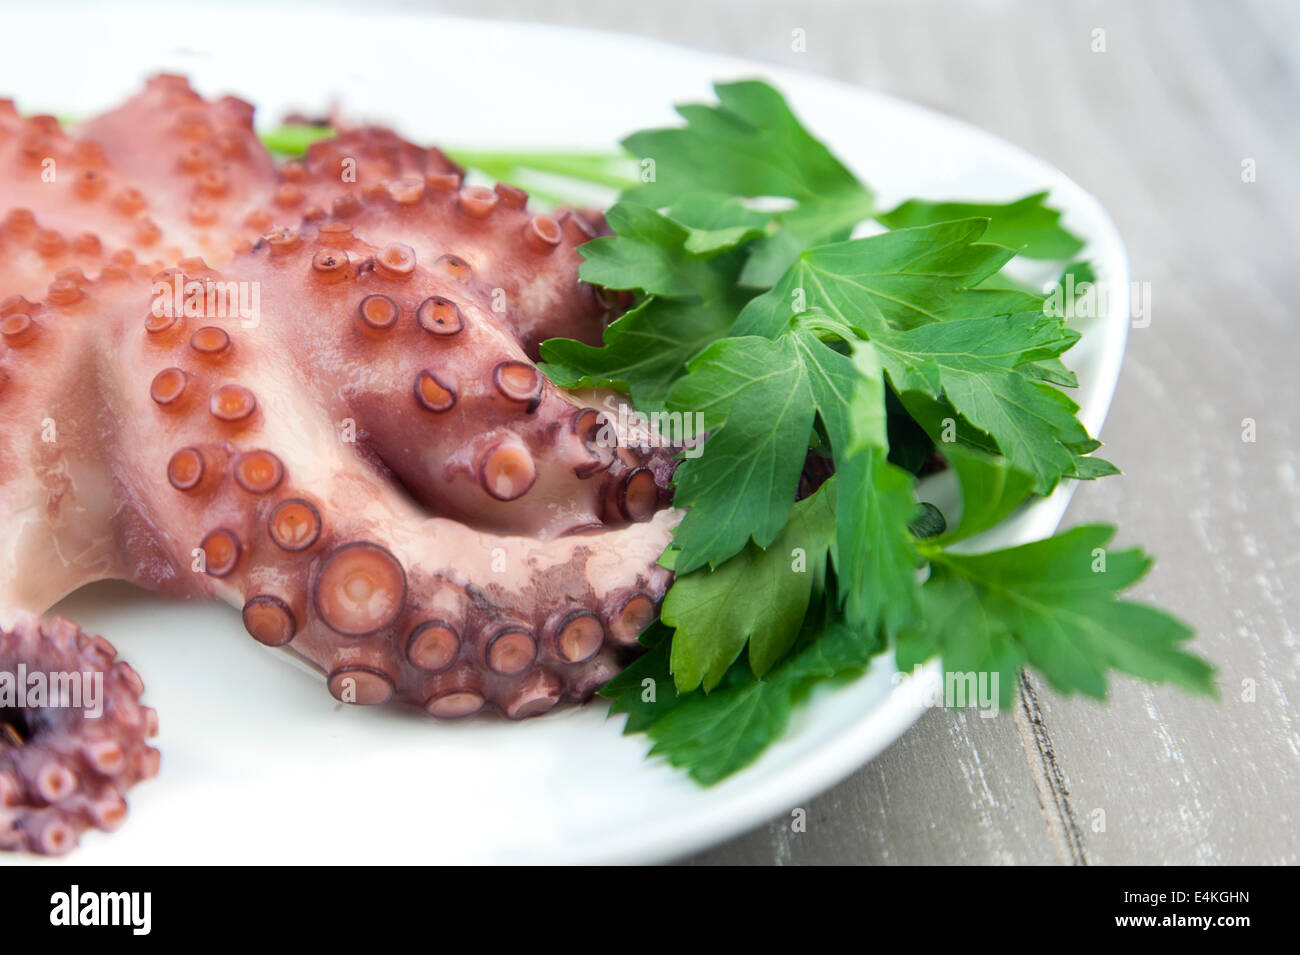 Octopus and parsley leaves on a plate Stock Photo